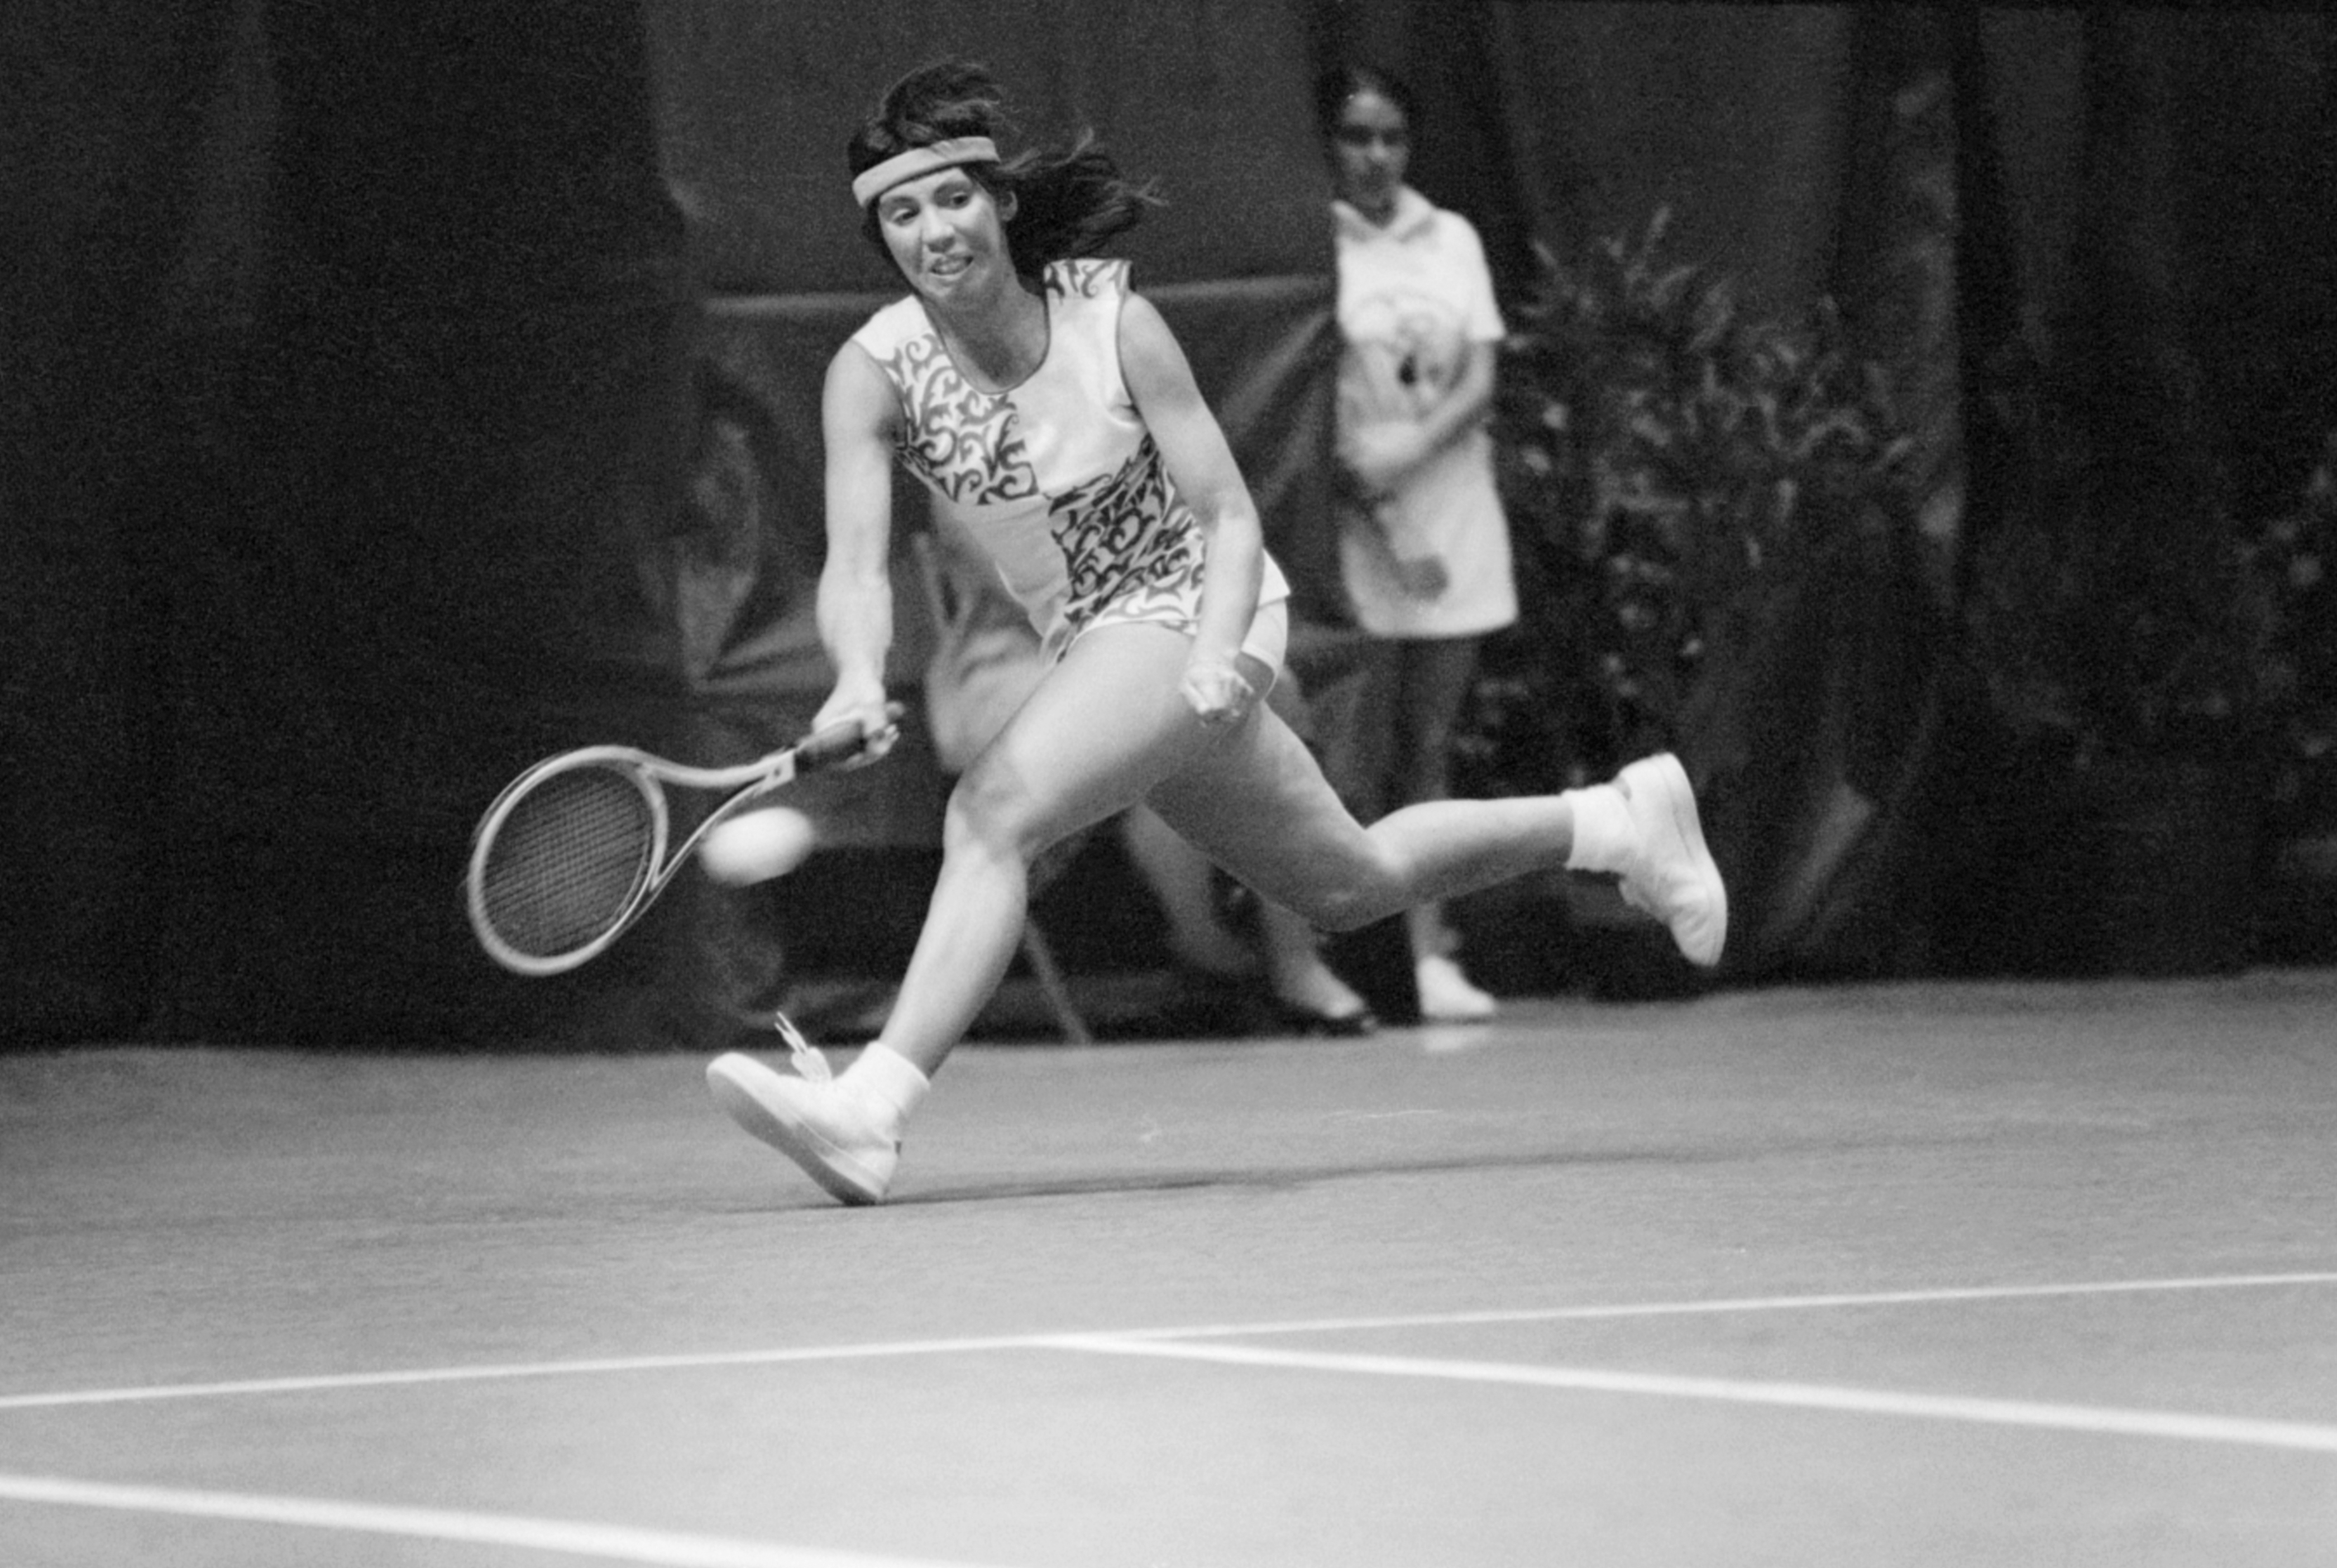 Tennis pro Rosie Casals races to reach a serve by Kerry Nelville in their match in the Virginia Slims Tennis Tournament here 4/26. Casals won in two sets, 6-2, 6-4. (Bettmann—Bettmann Archive)